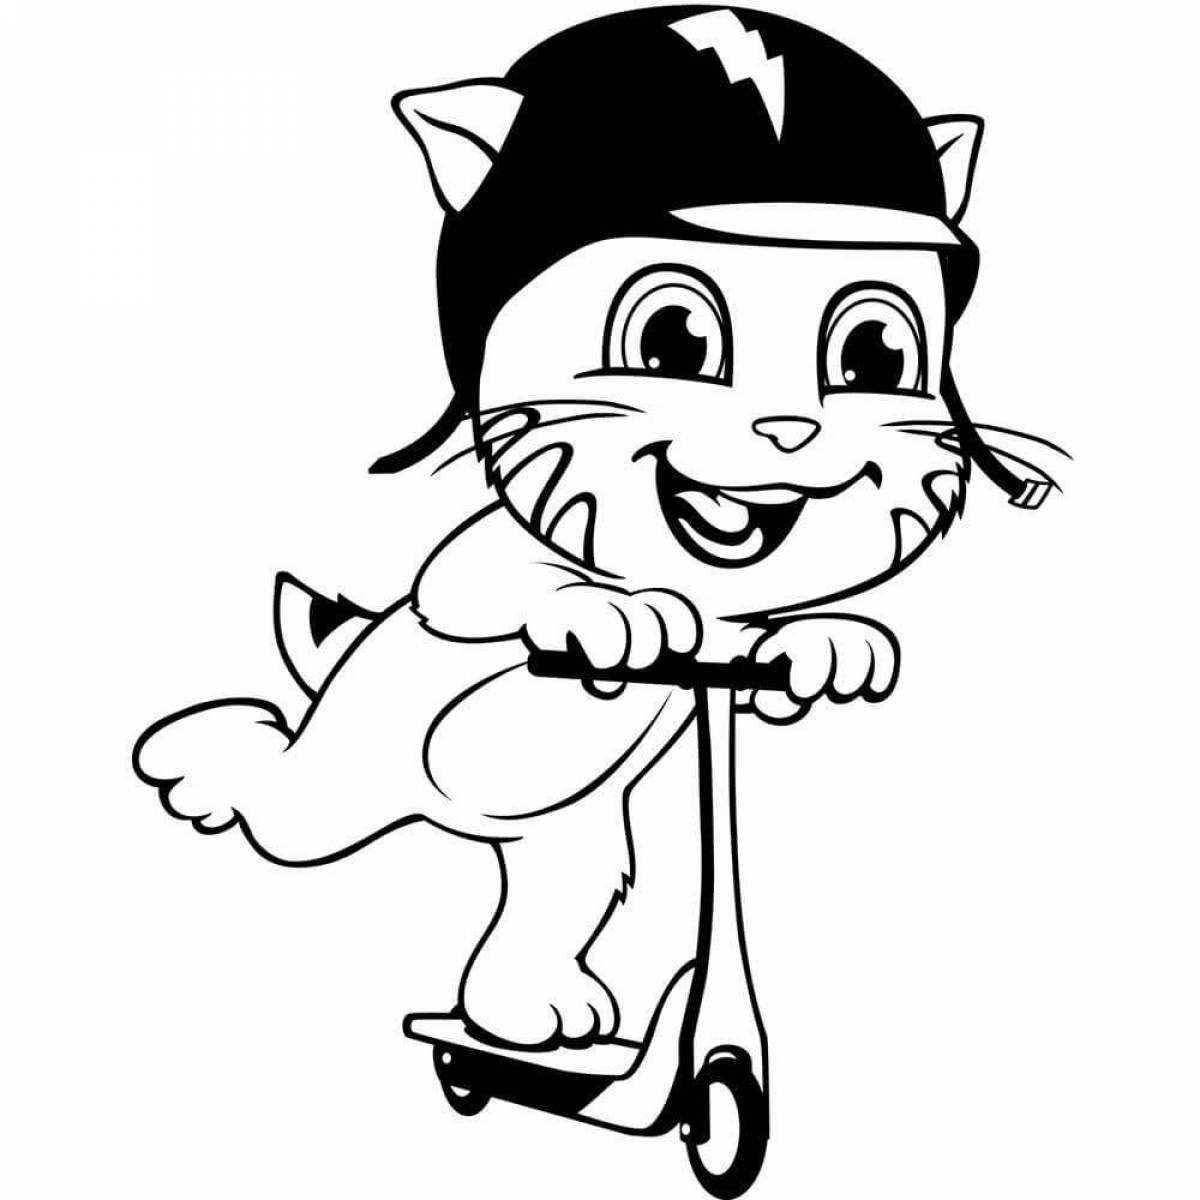 Colorful tom cat coloring page